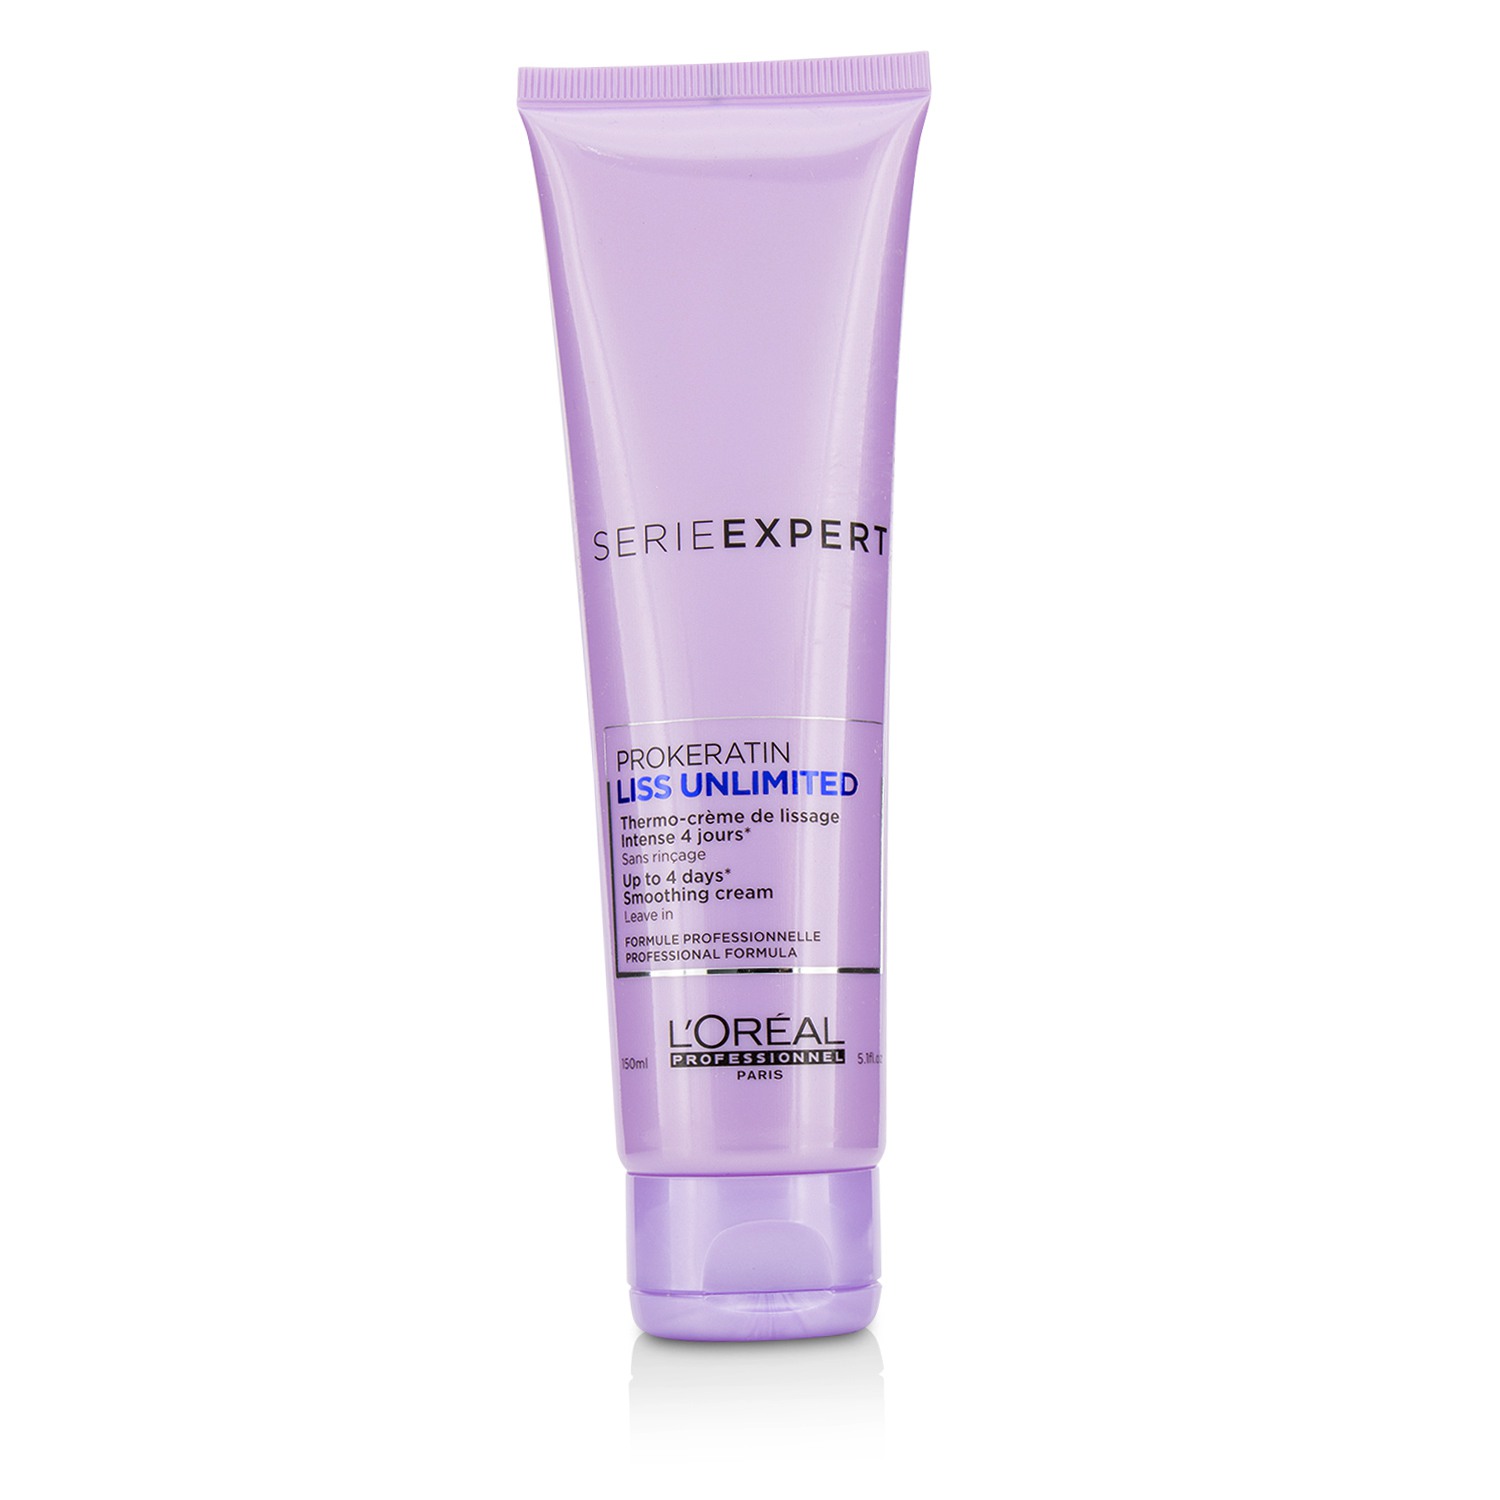 Professionnel Serie Expert - Liss Unlimited Prokeratin Up to 4 days* Smoothing Cream LOreal Image